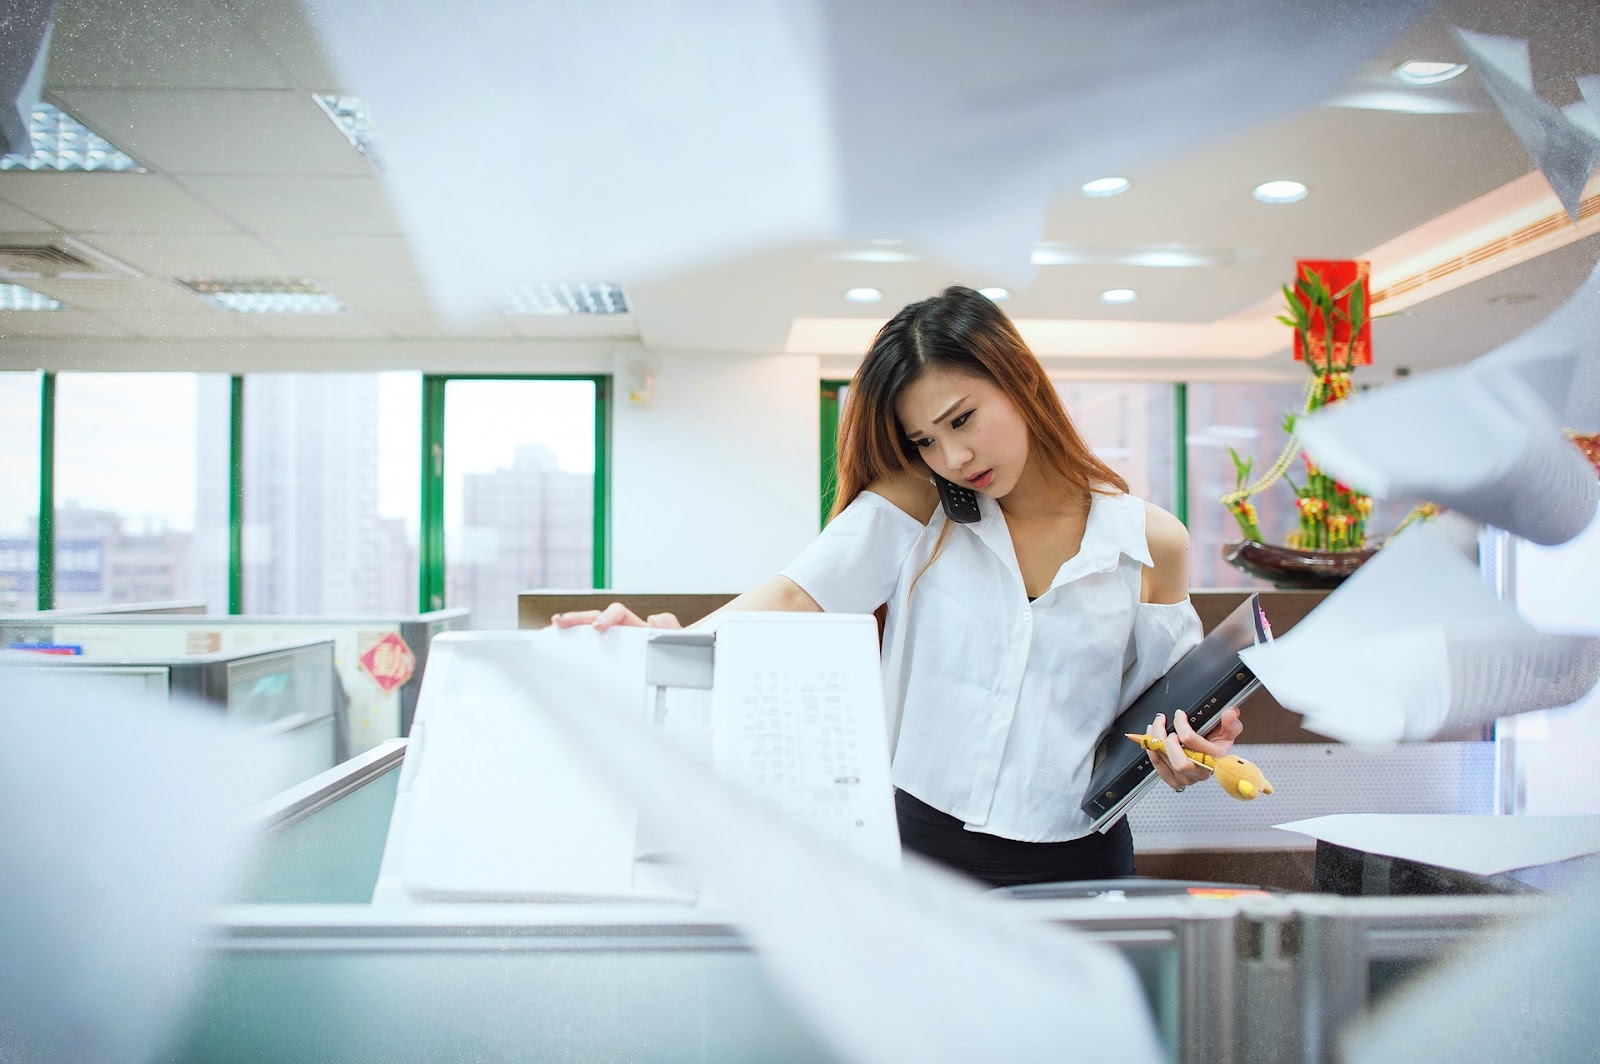 A picture of a busy female office worker, carrying notes, making copies, and talking on the phone